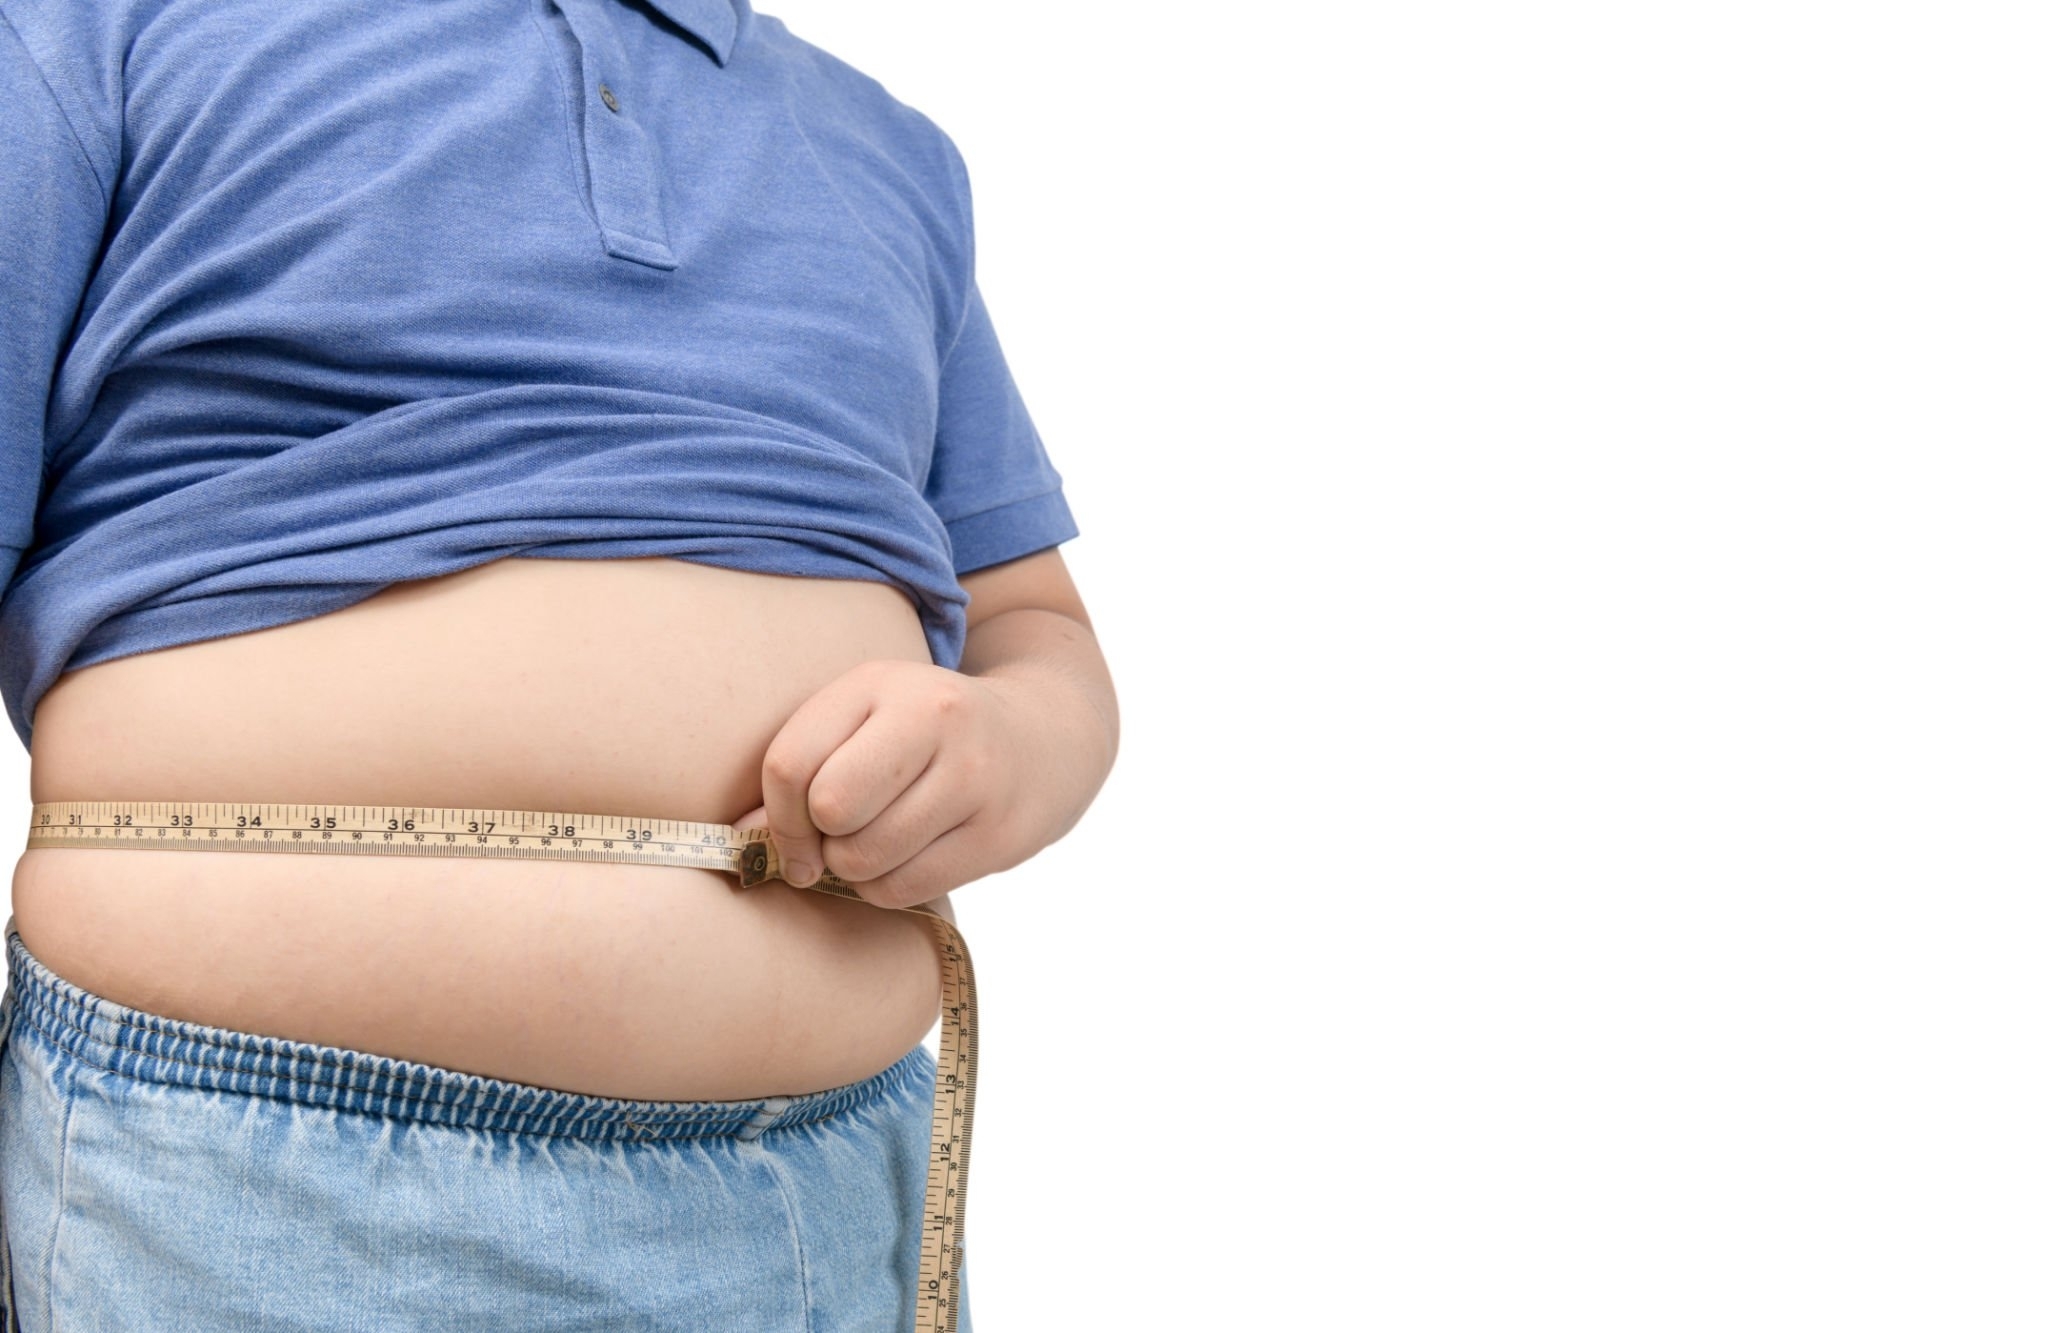 How Do I Know If My Child Is Overweight or Obese?